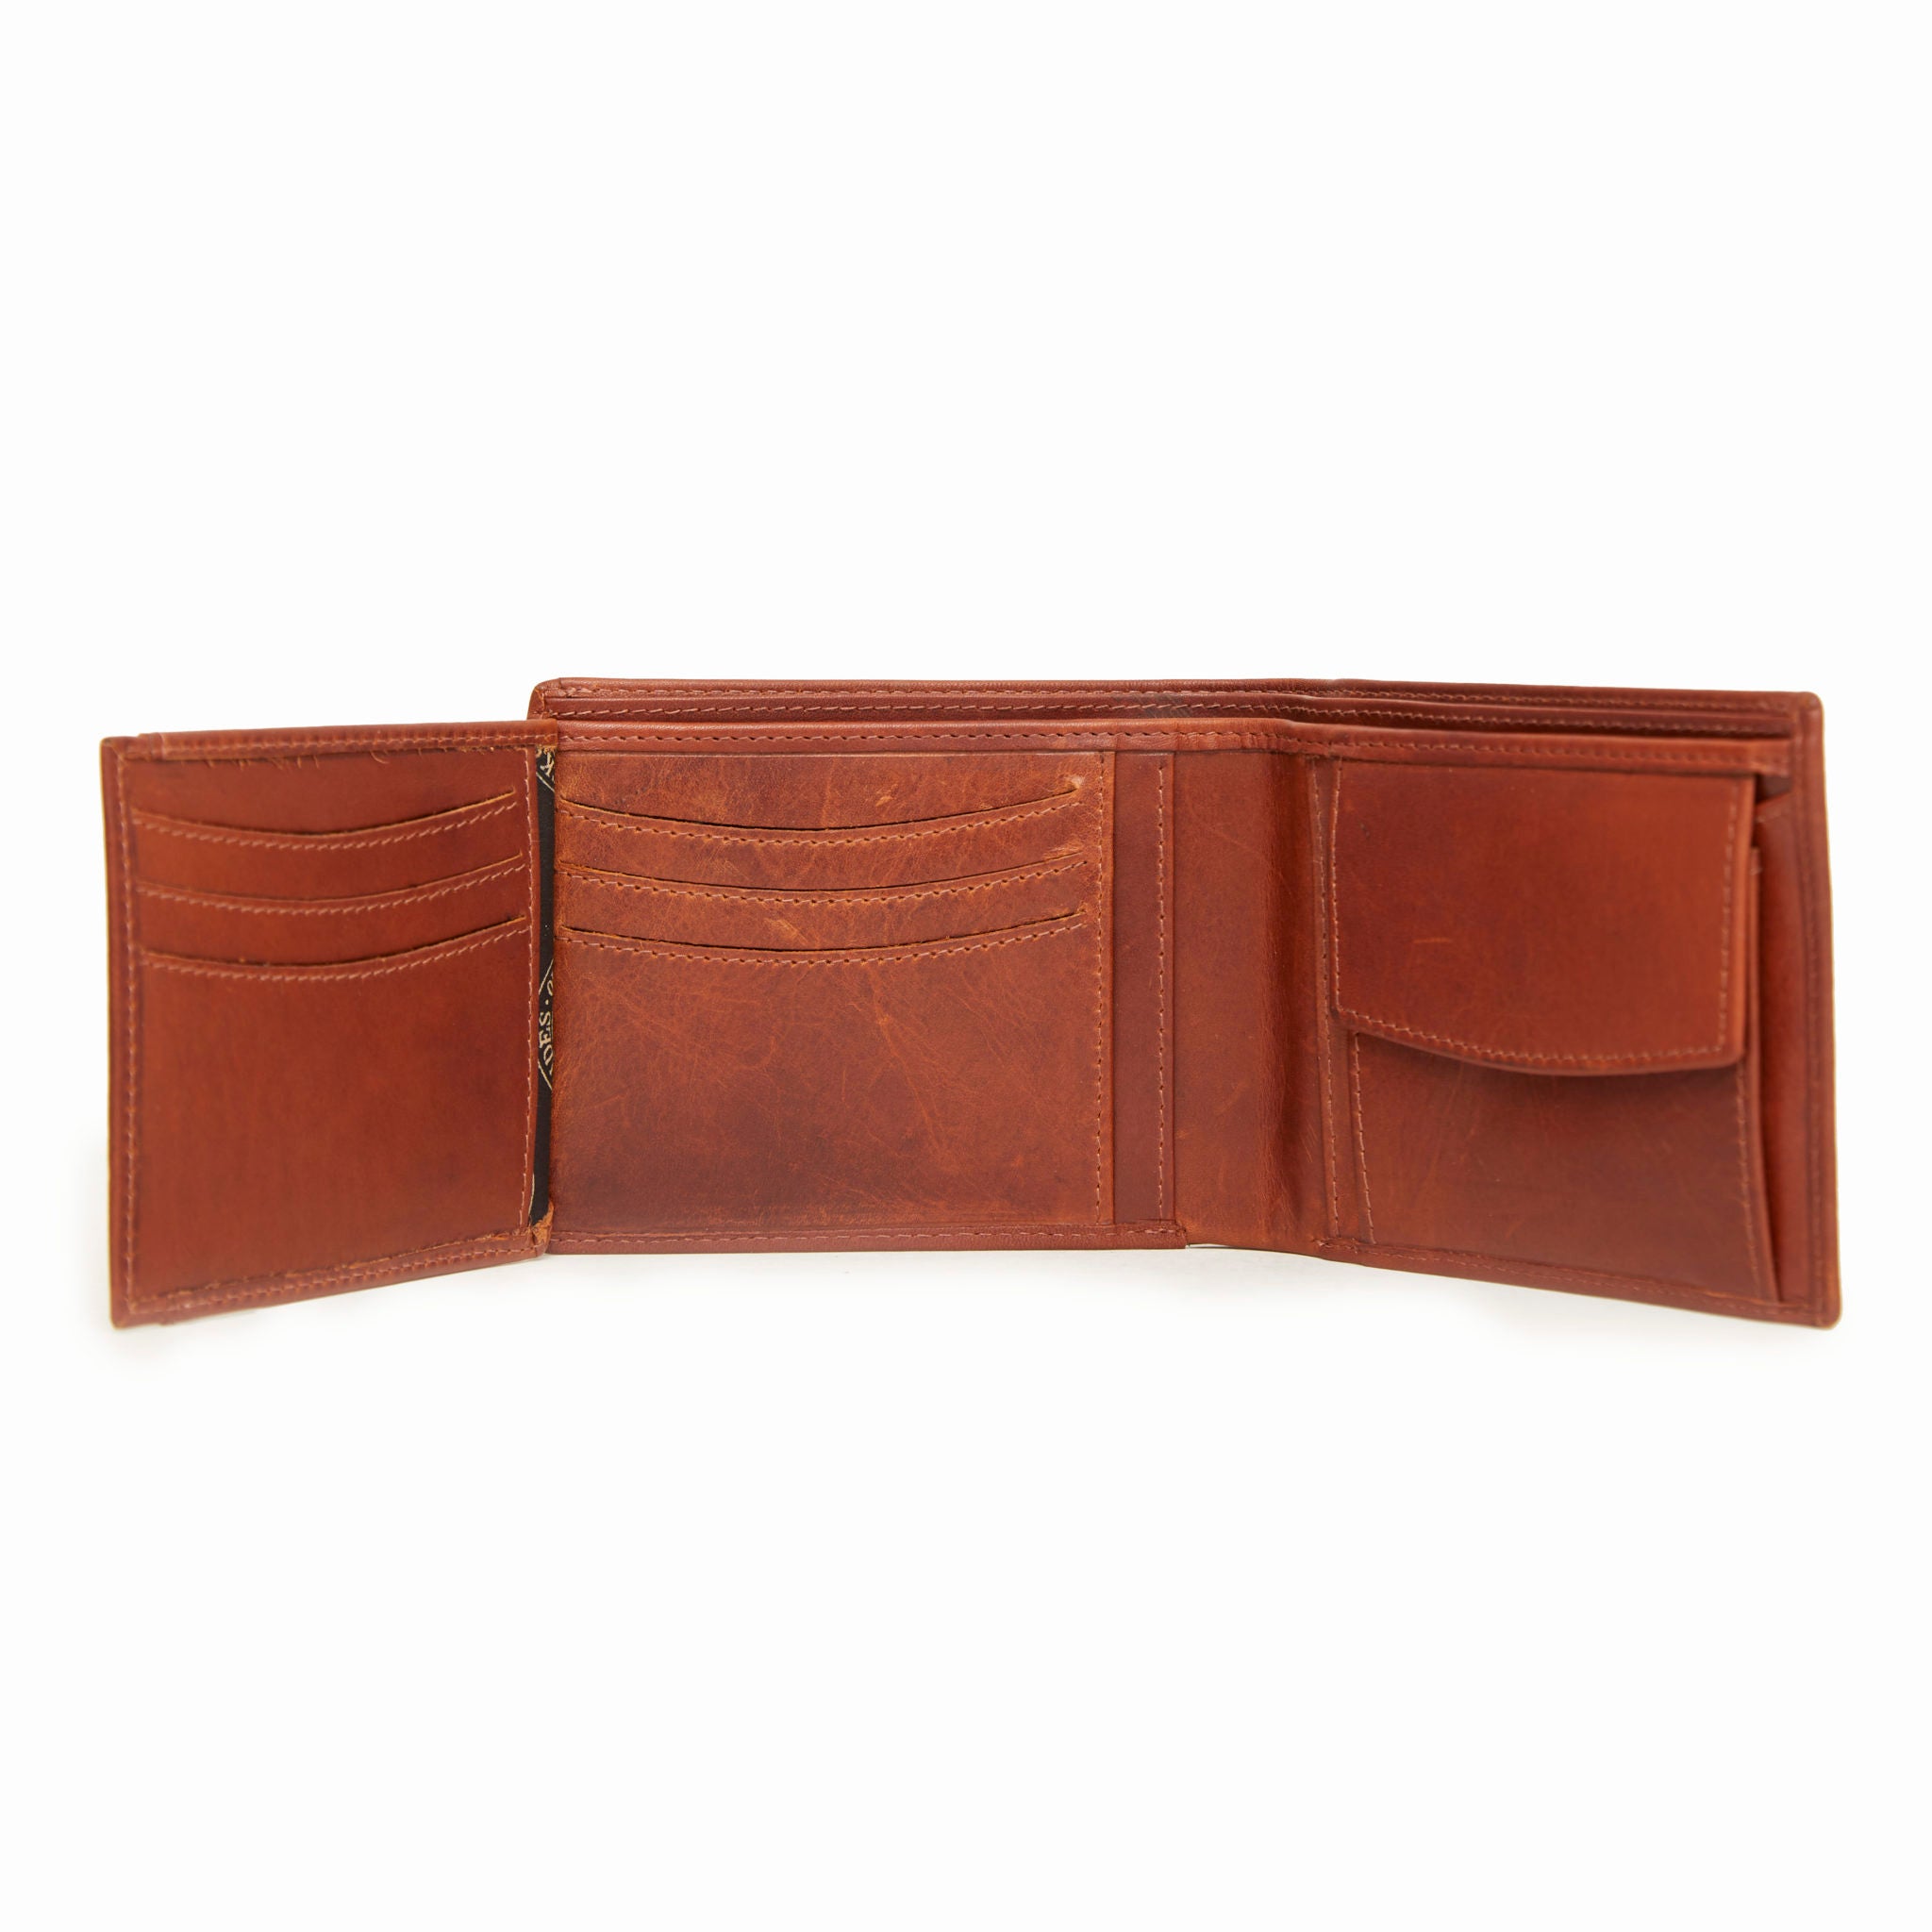 Landmark | Hicks and Hides 12 Bore Leather Wallet for Men in Cognac